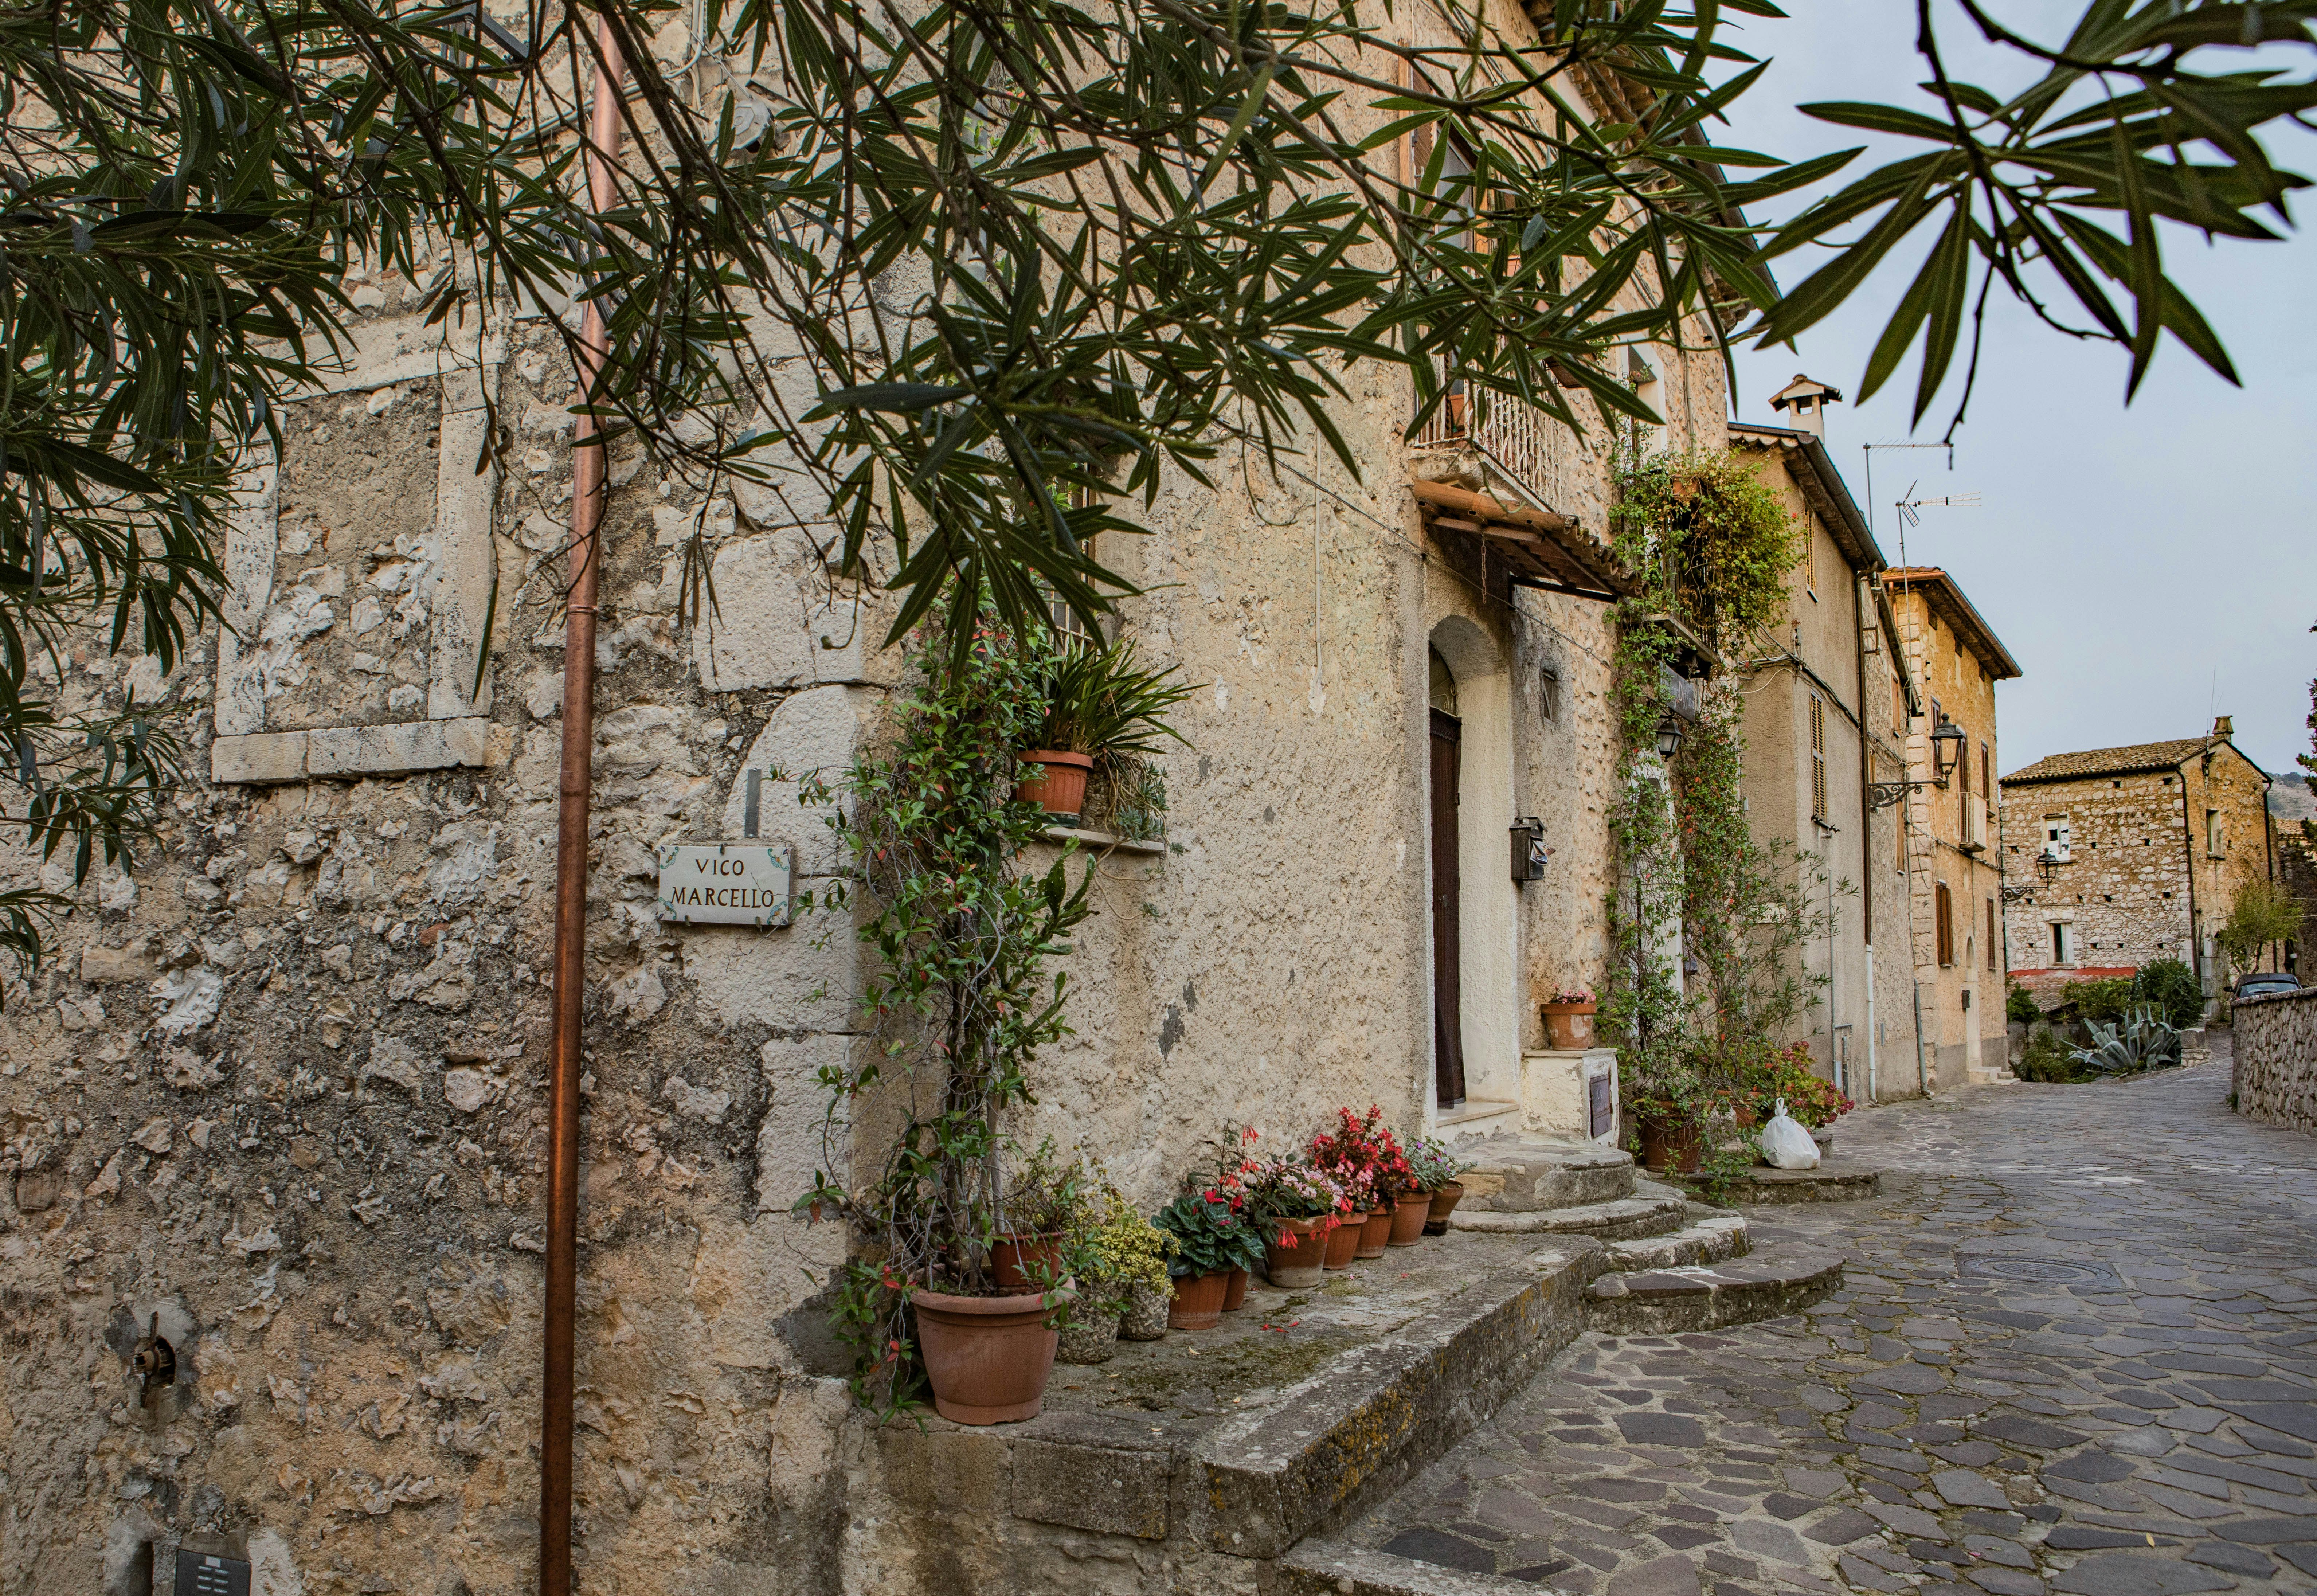 The corner of the winding, cobbled, medieval streets of Pico is marked with a sign reading Vico Marcello. Vines and potted plants line the exterior of the stone and clay houses, while in the immediate foreground the branches of an olive tree reach out from the viewer's vantage point. 